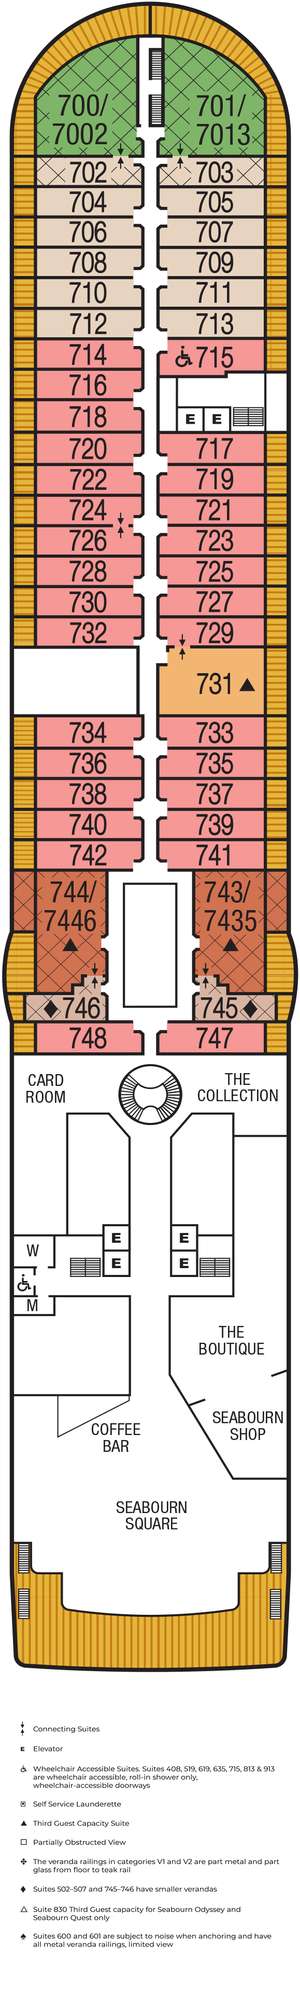 Deck plan for Seabourn Sojourn